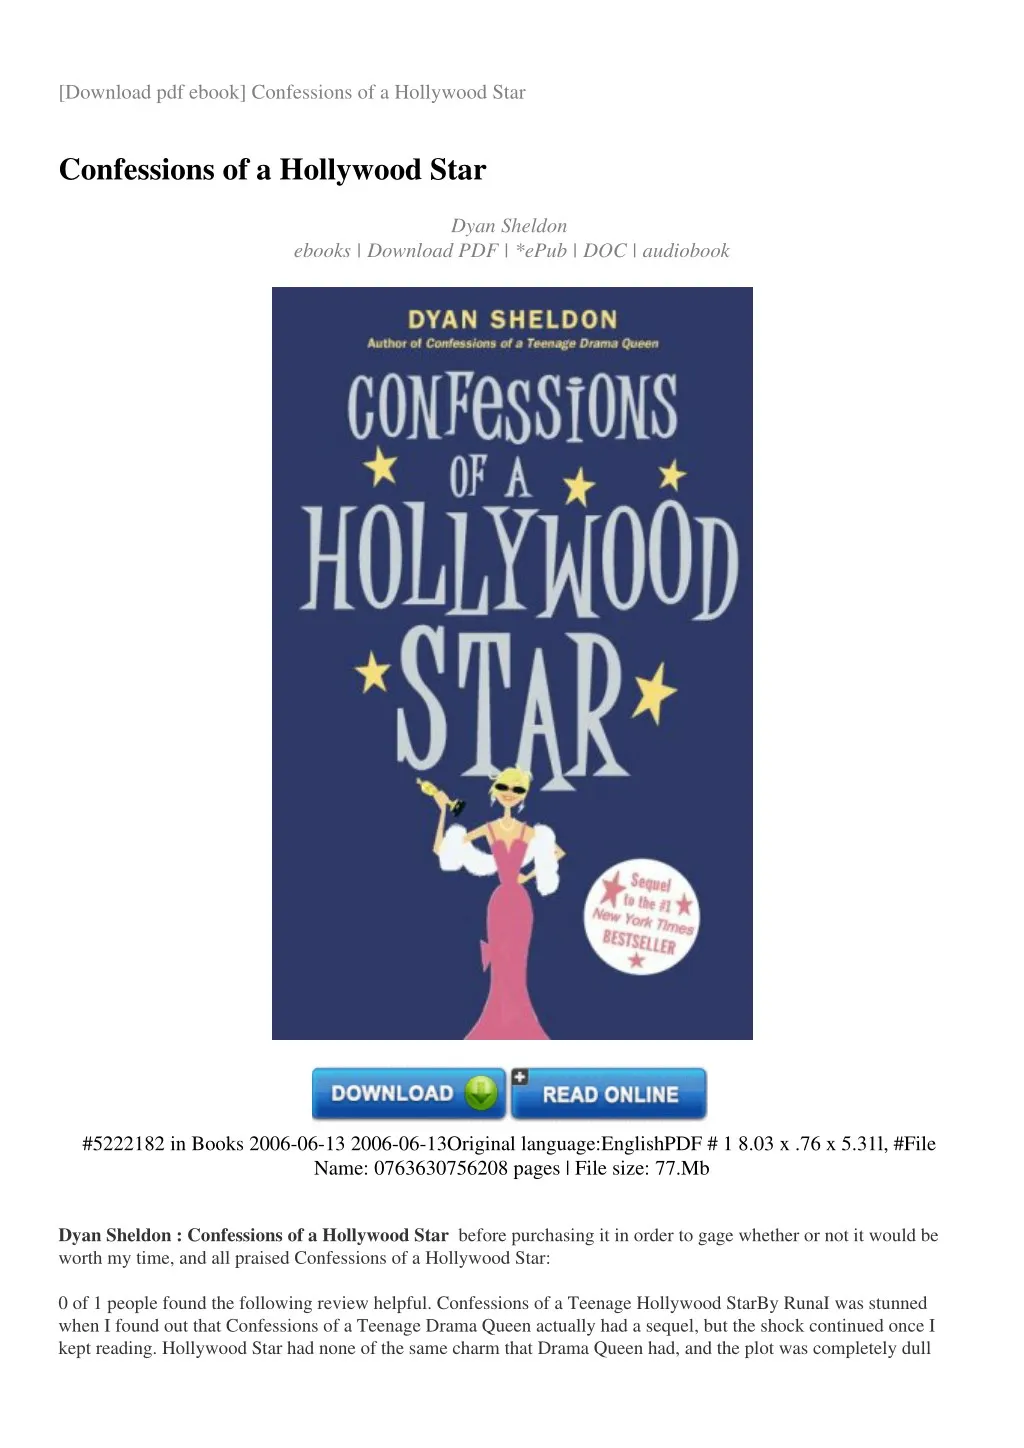 download pdf ebook confessions of a hollywood star n.